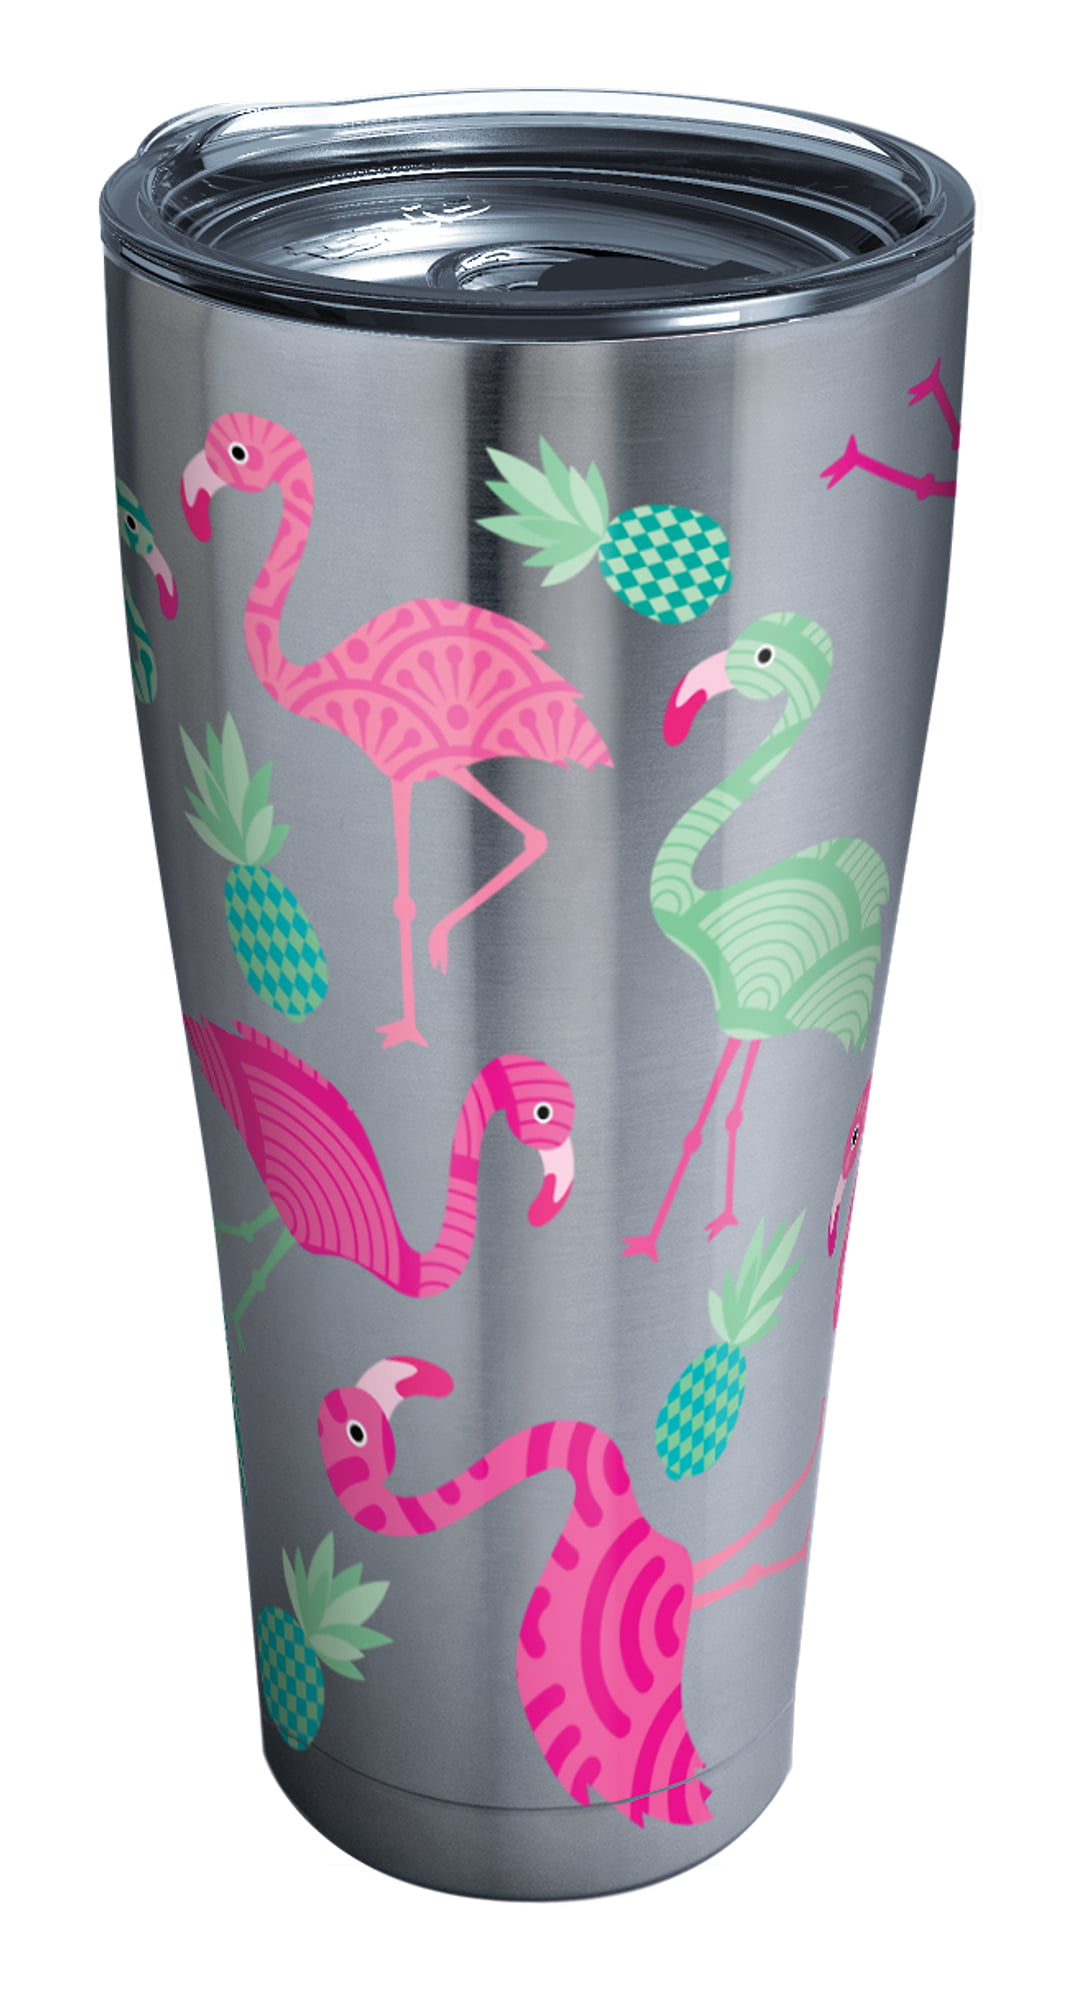 30oz Stainless Steel Tervis Triple Walled Puppie Love Insulated Tumbler Cup Keeps Drinks Cold & Hot Pineapple Disguise